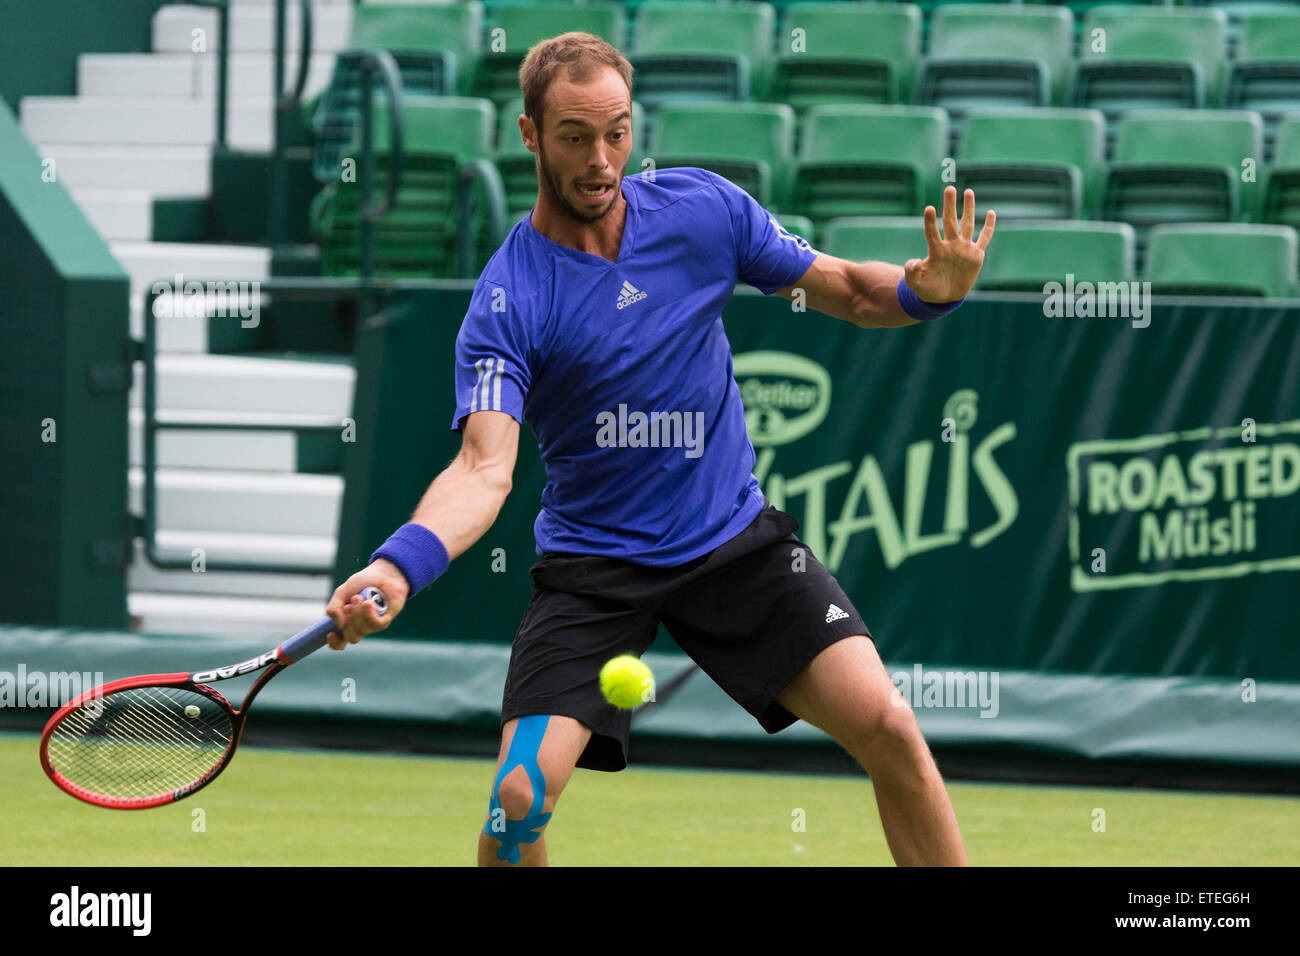 Tim Puetz (DE) returns a shot in the qualifying rounds of the ATP Gerry Weber Open Tennis Championships at Halle, Germany. Stock Photo